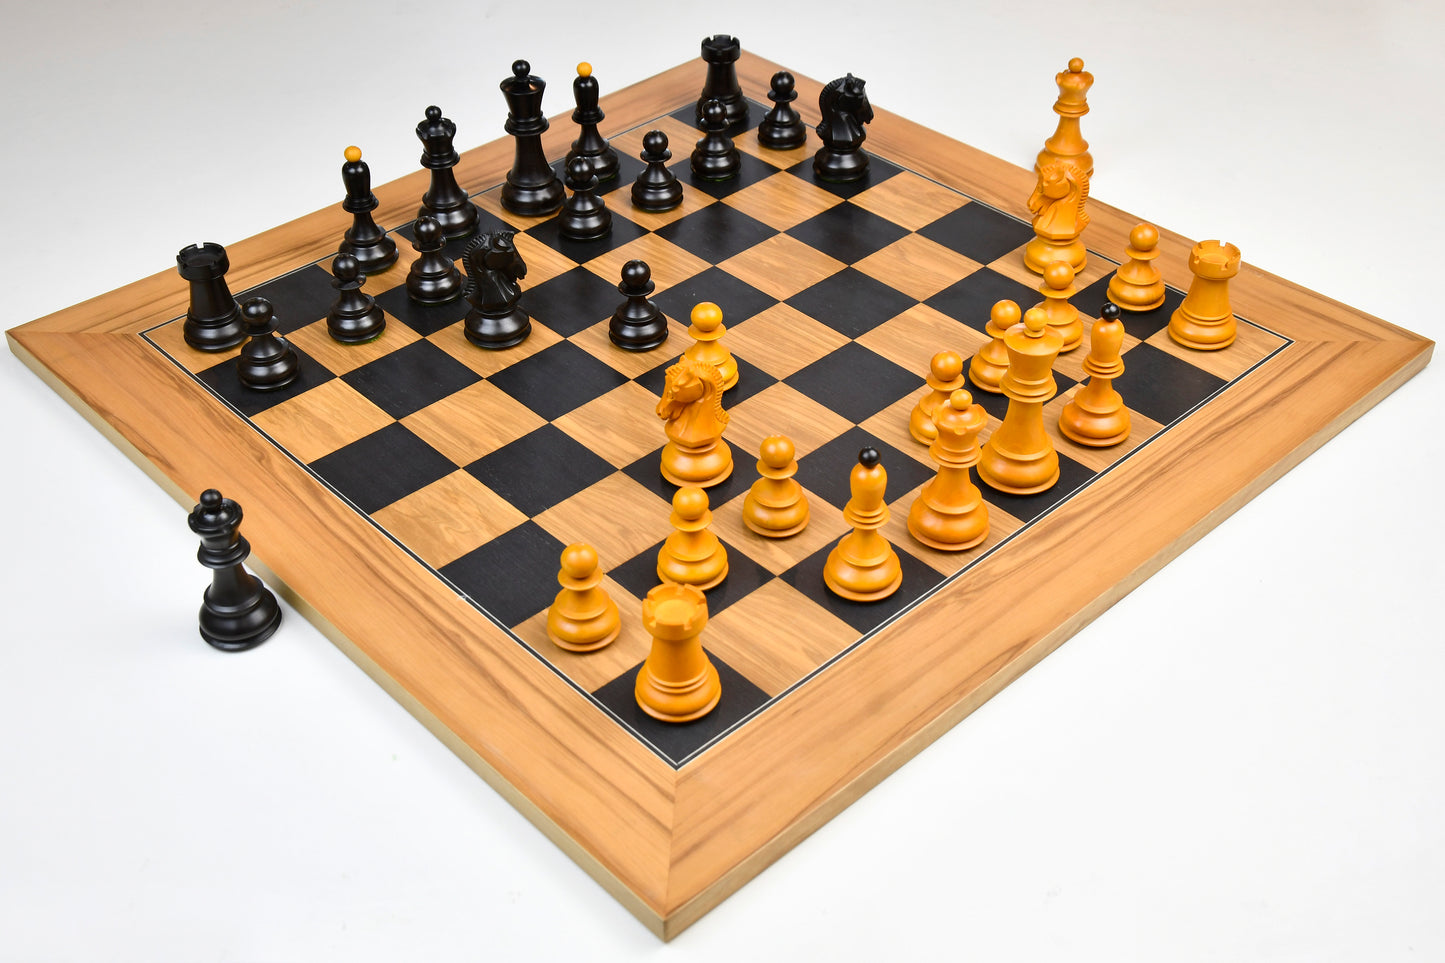 1950 Repro Dubrovnik Bobby Fischer Chessmen Version 3.0 in Ebonized & Antiqued boxwood - 3.7" King with Board